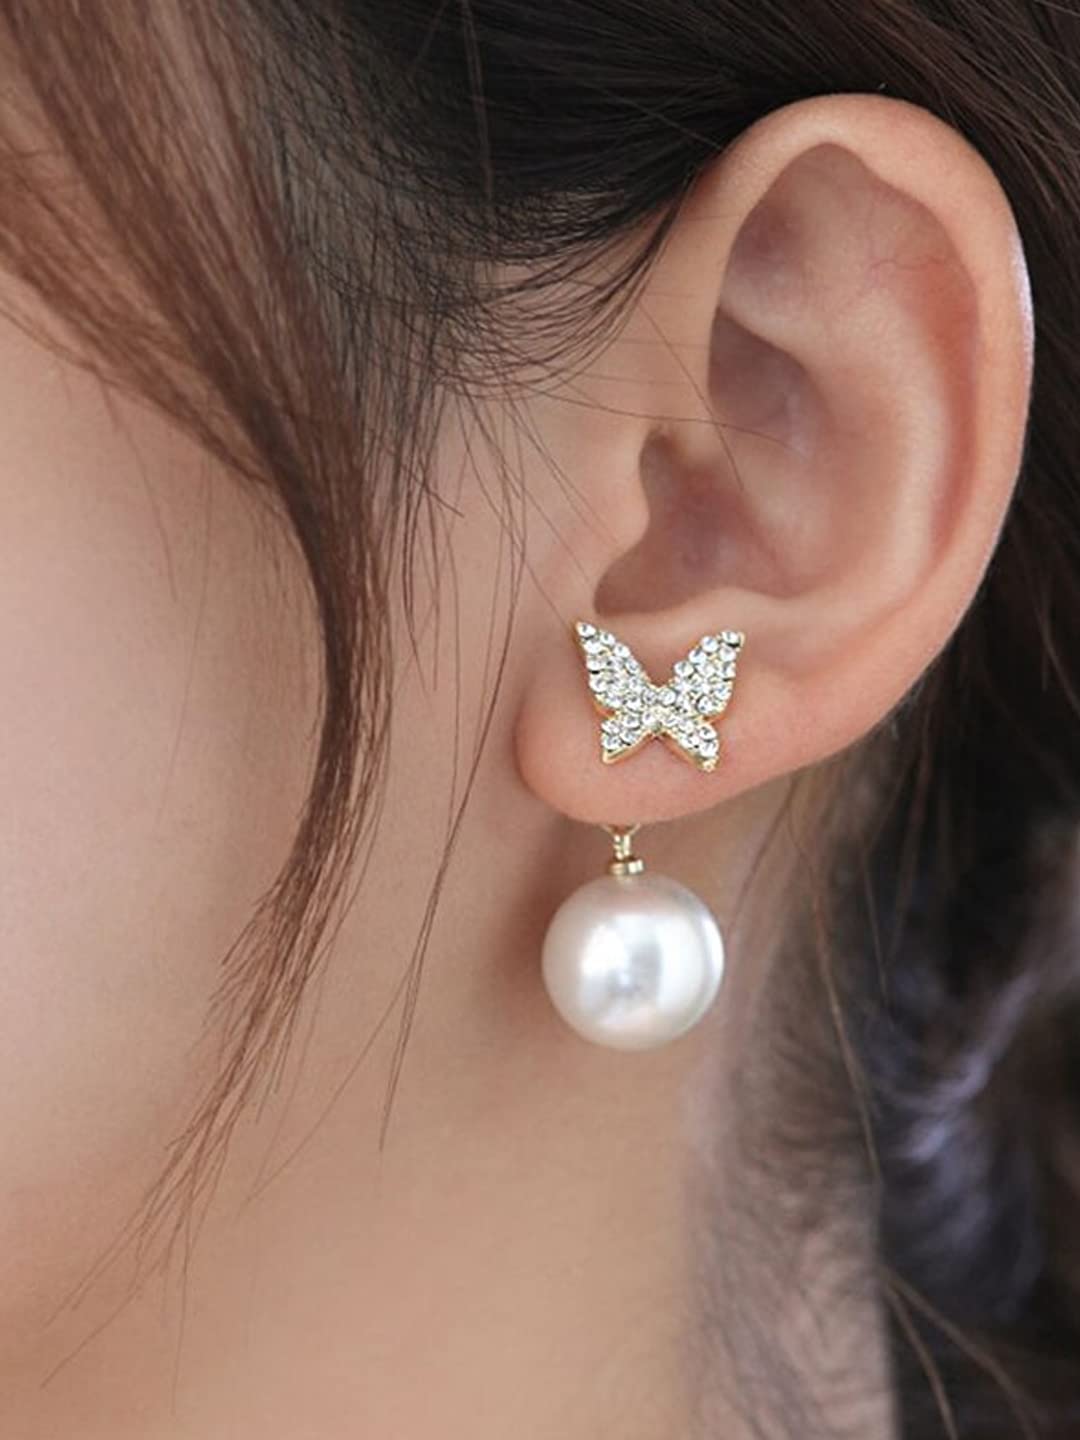 Yellow Chimes Earrings For Wonen Butterfly Shaped Crystal Studded Pearl Drop Earrings For Women and Girls